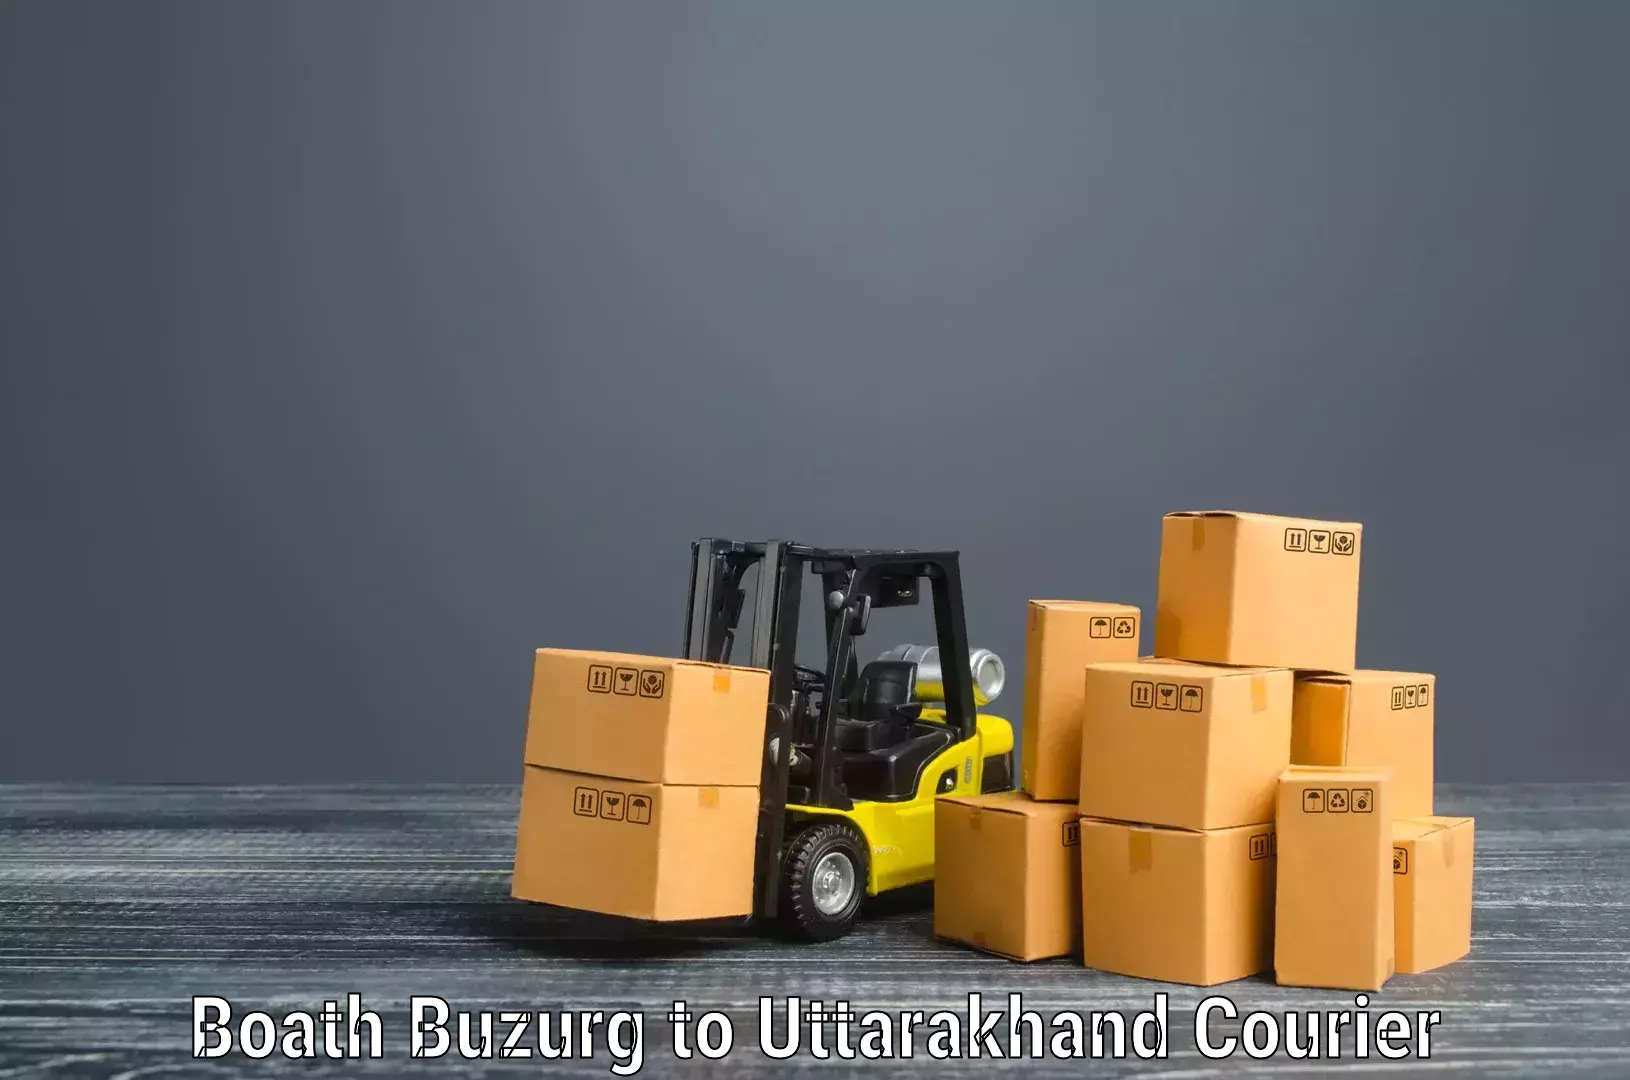 Cost-effective moving solutions Boath Buzurg to Kashipur